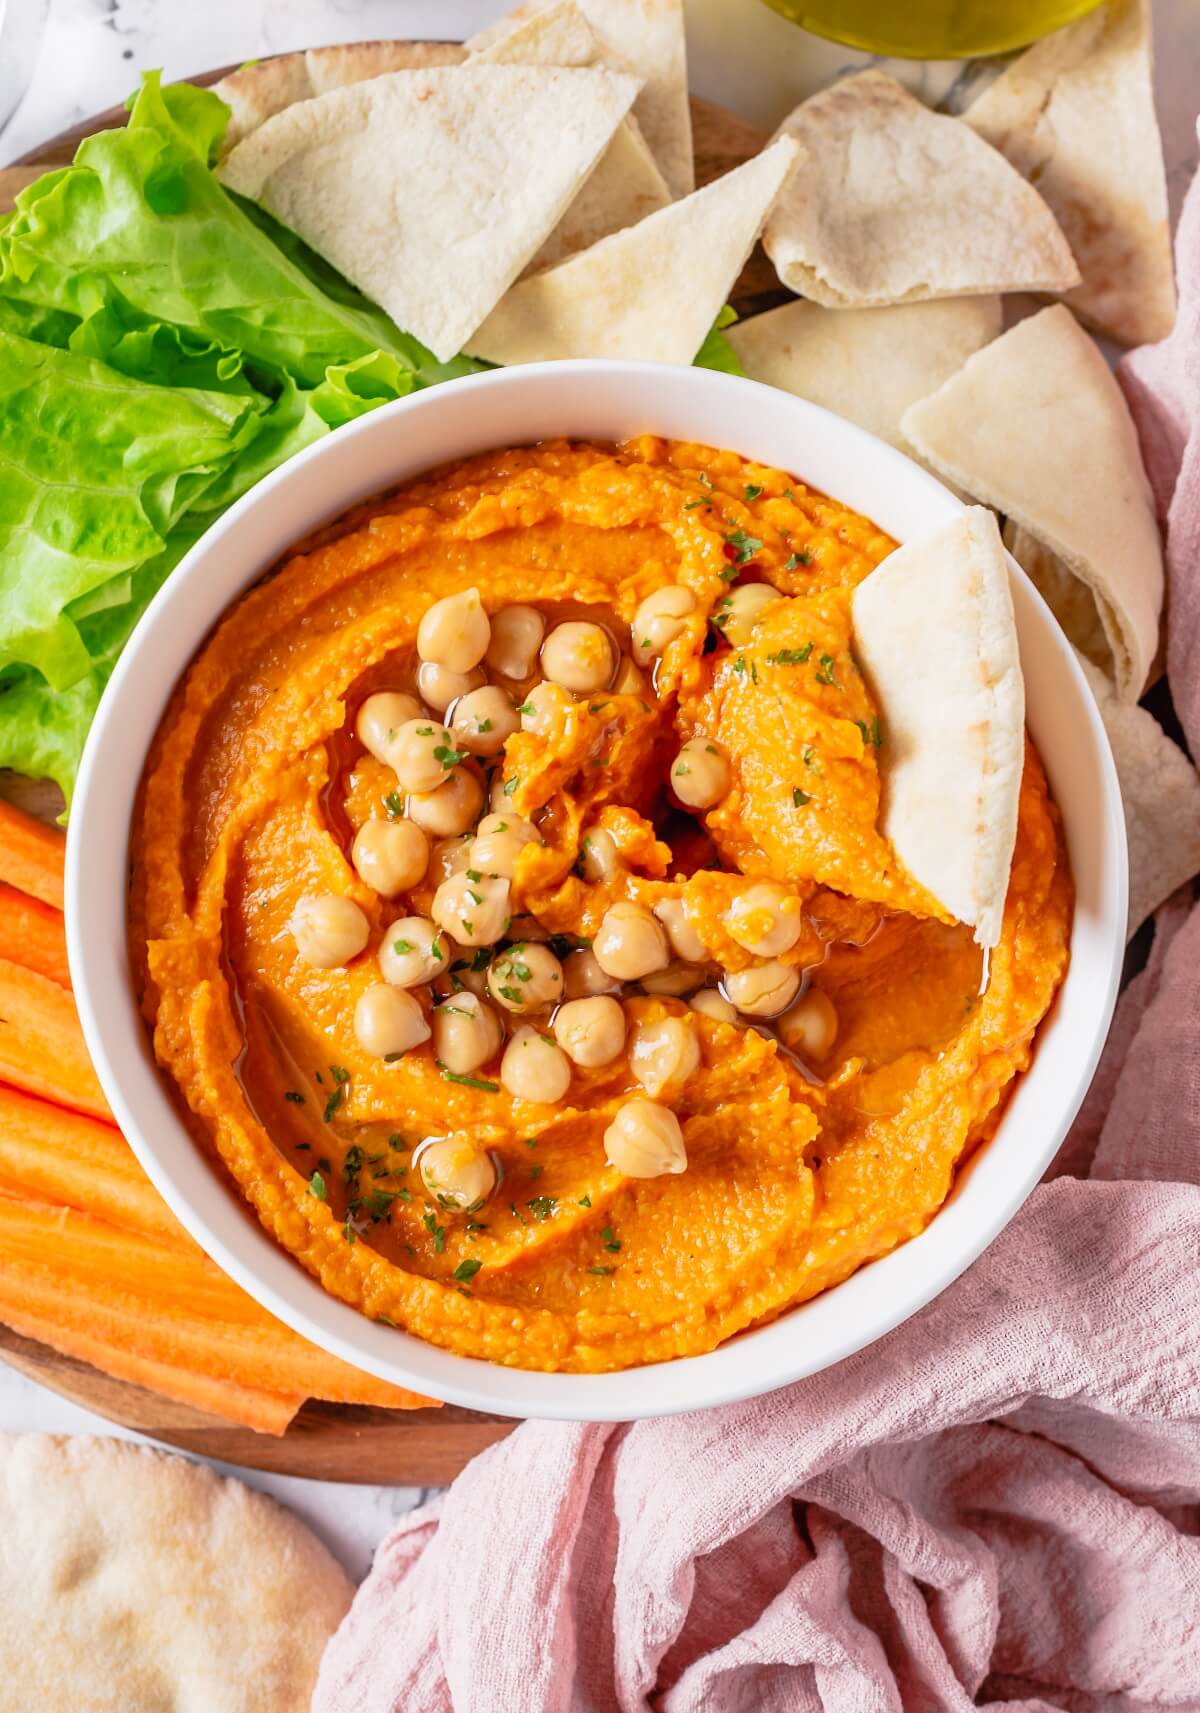 A white bowl of pumpkin hummus topped with chickpeas and olive oil surrounded by pita bread and carrot sticks.